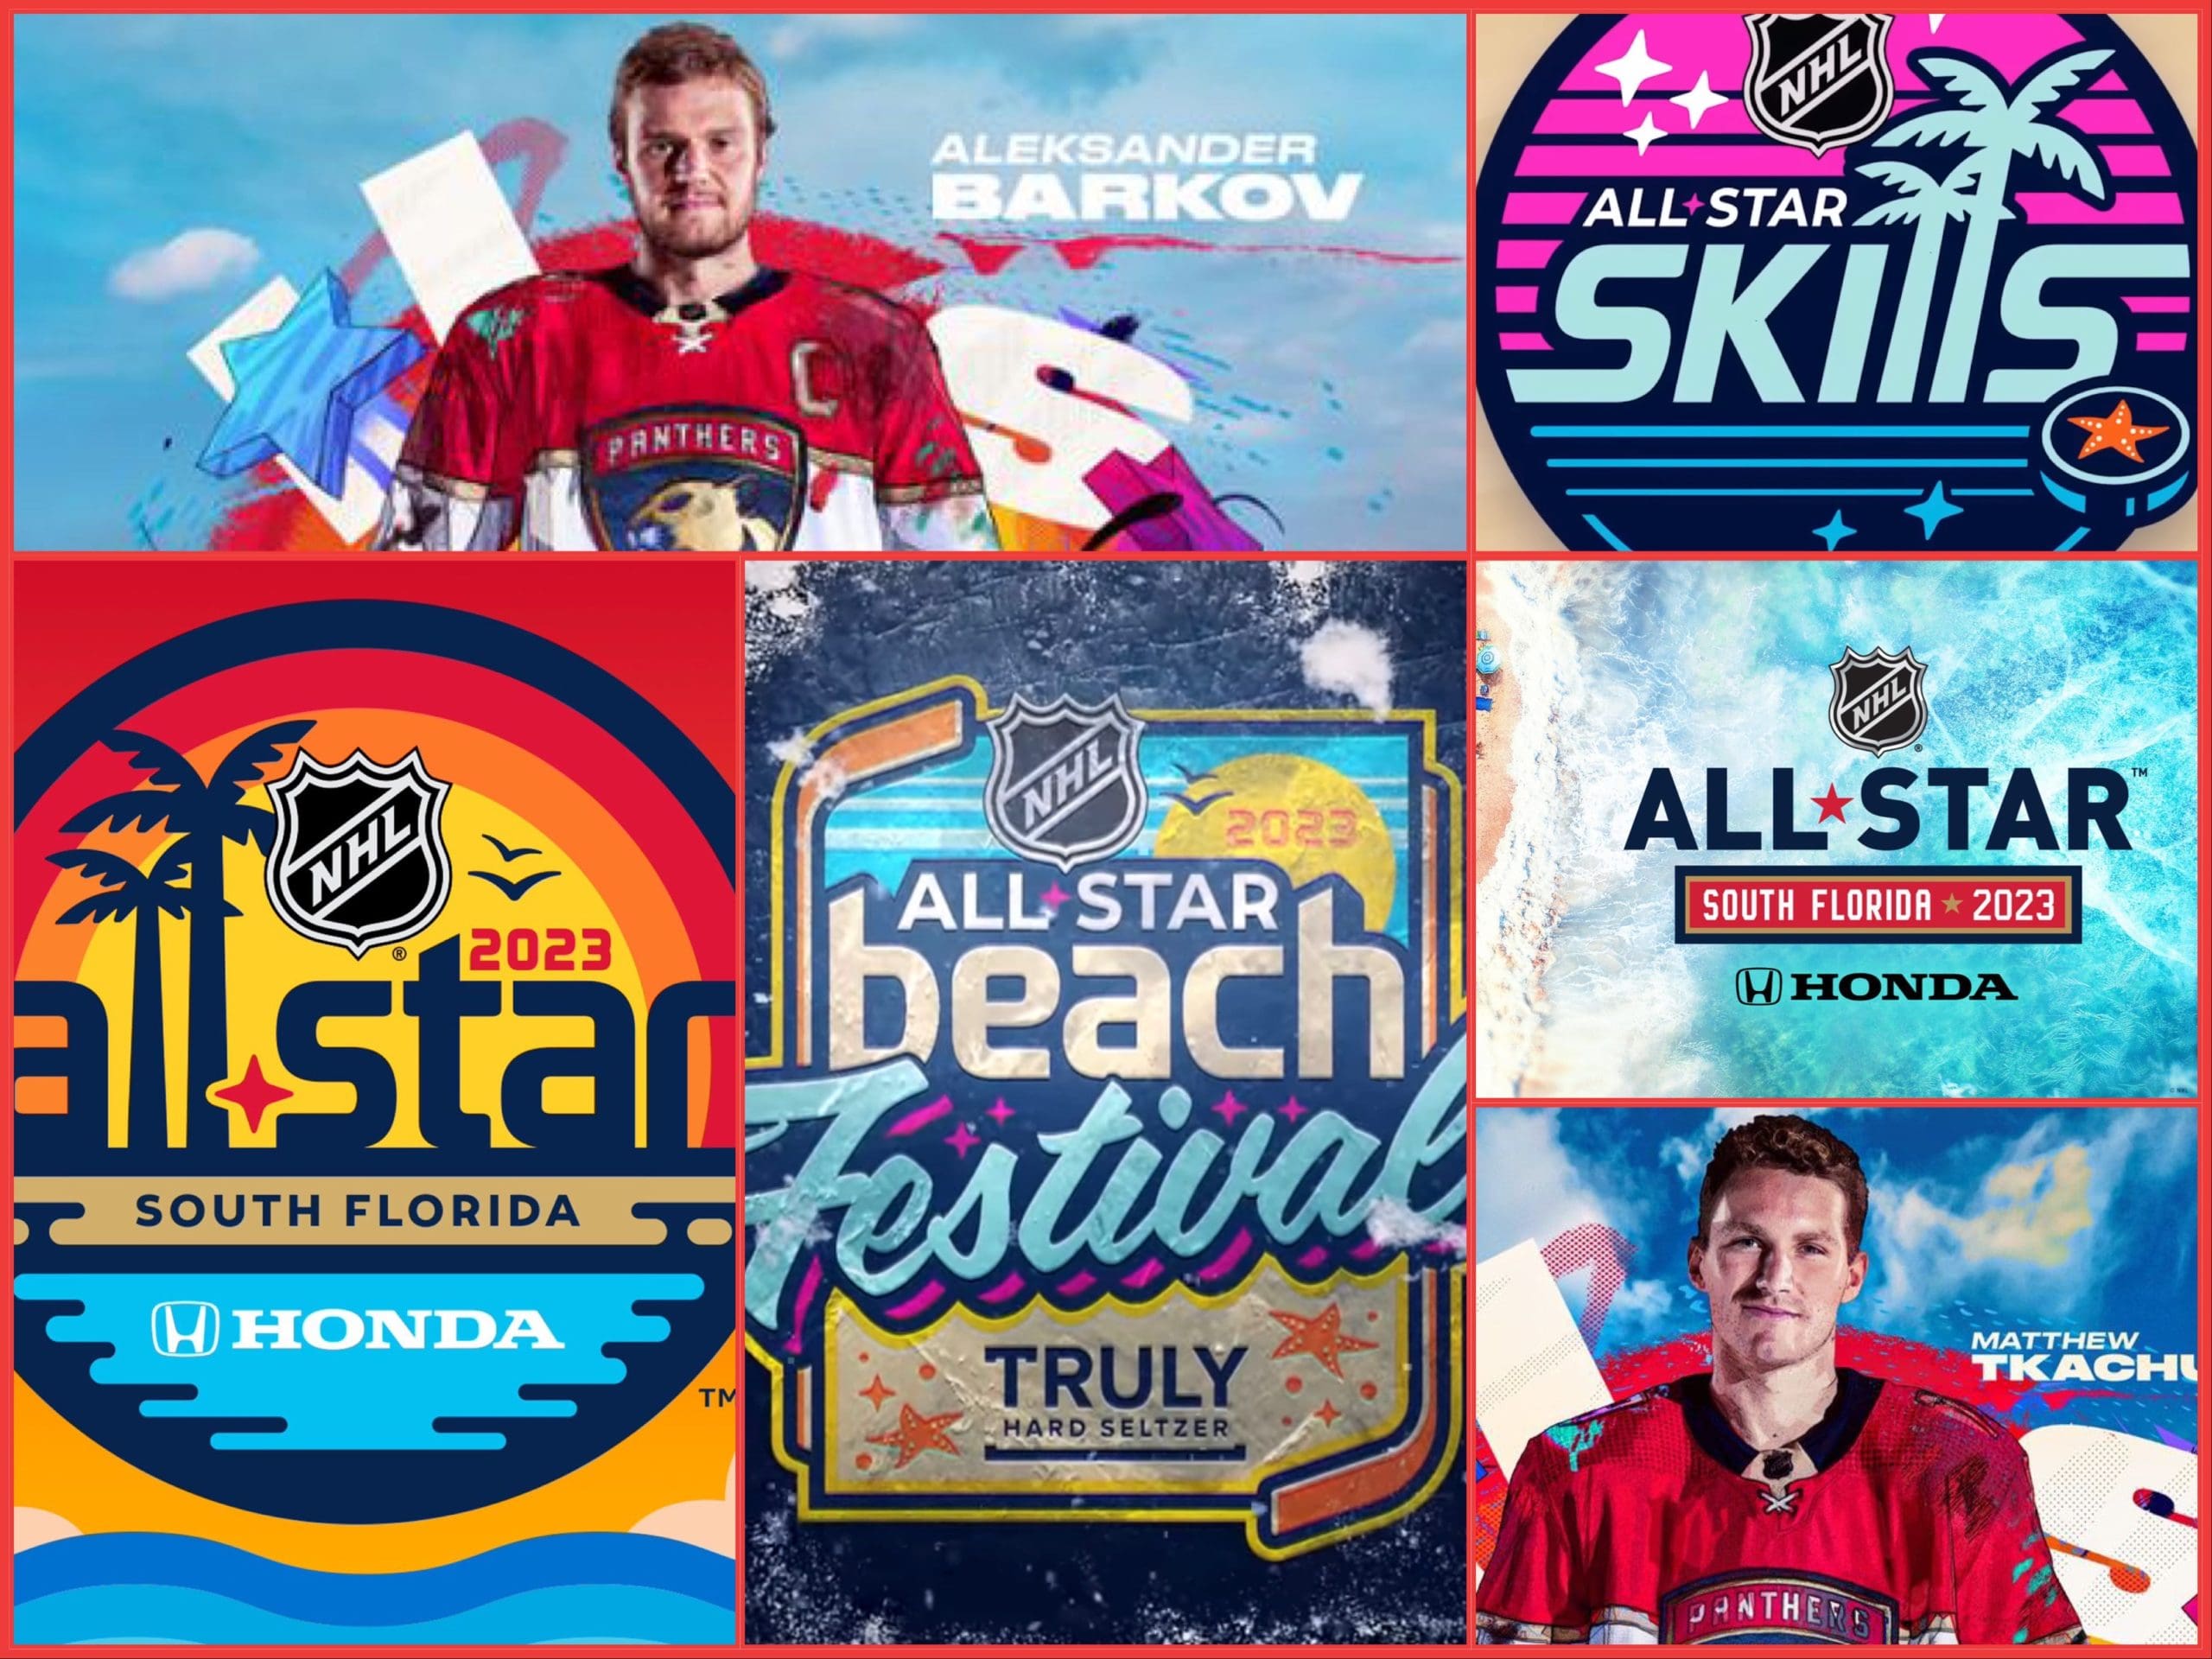 Complete Guide to NHL All-Star Events in South Florida